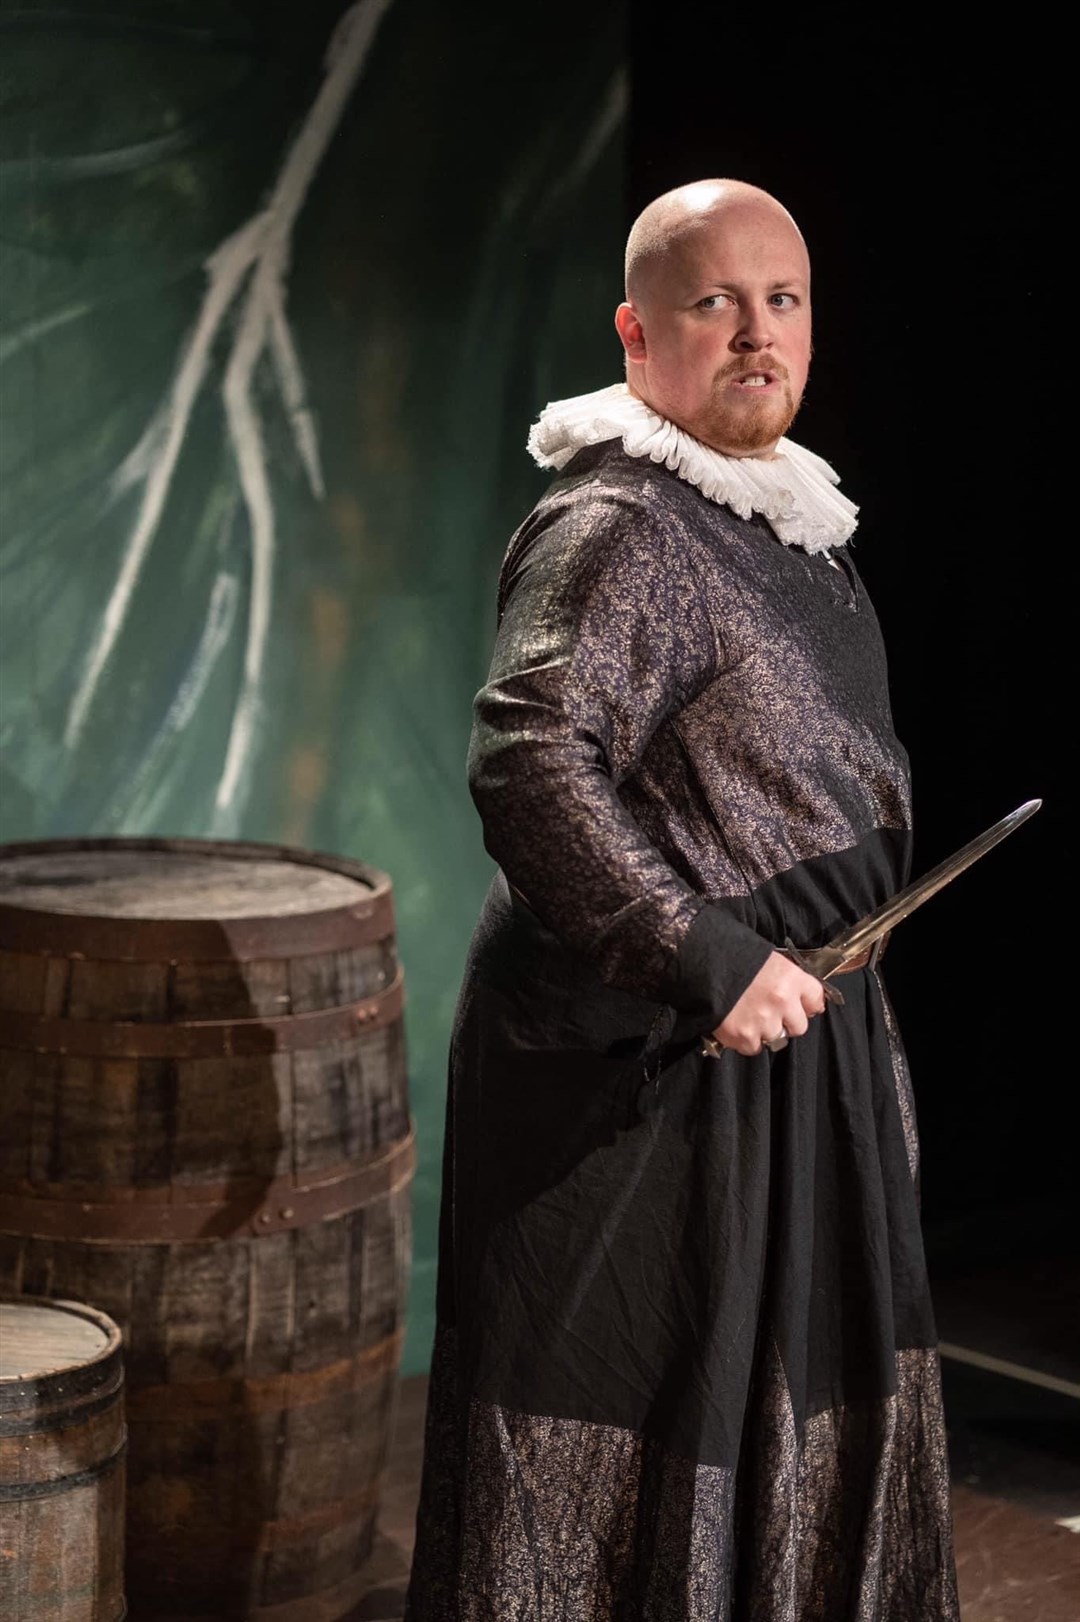 Sean MacGregor in the role of Lord Montague in Romeo and Juliet at the Attic Theatre in Stratford-upon-Avon. Picture: Andrew Maguire